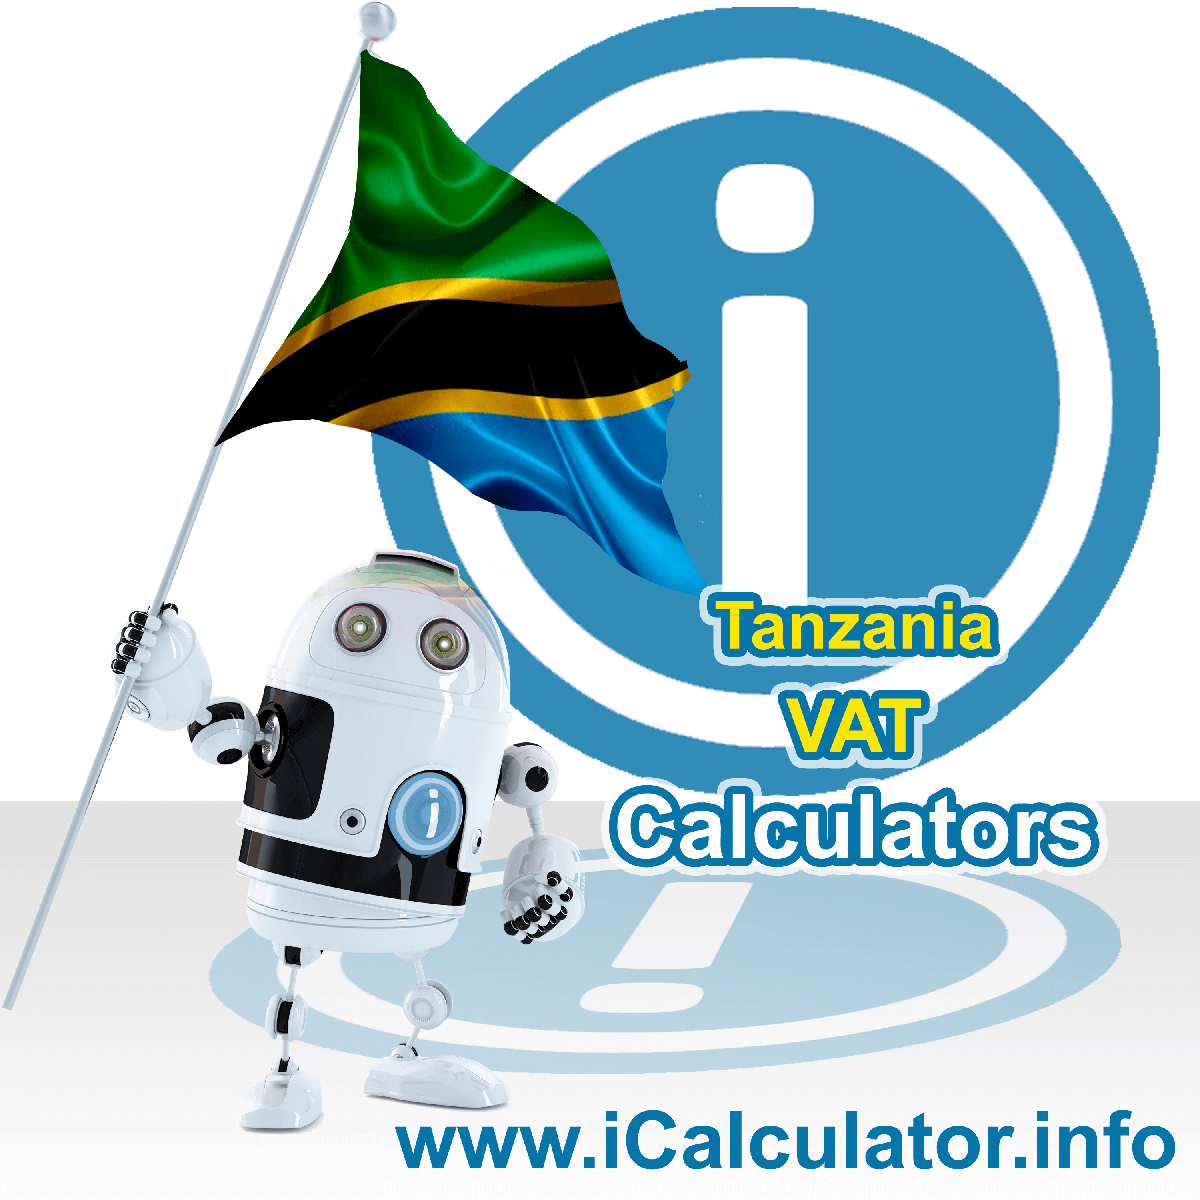 Tanzania VAT Calculator. This image shows the Tanzania flag and information relating to the VAT formula used for calculating Value Added Tax in Tanzania using the Tanzania VAT Calculator in 2024